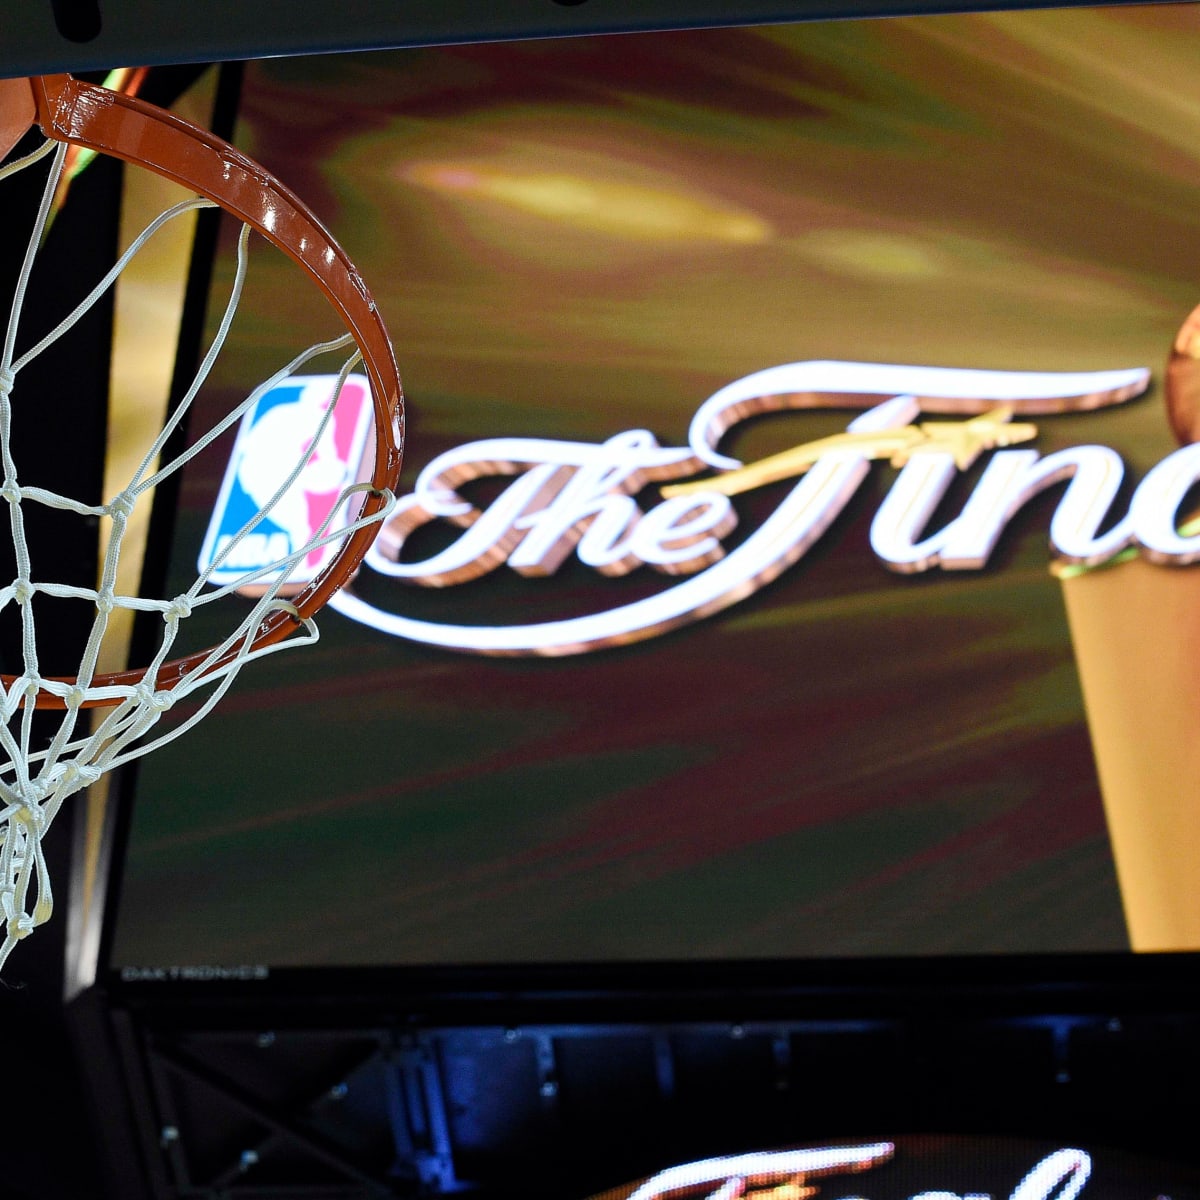 NBA Finals logo unveiled: NBA brings back reimagined version inspired by  classic script for 2022 Finals 